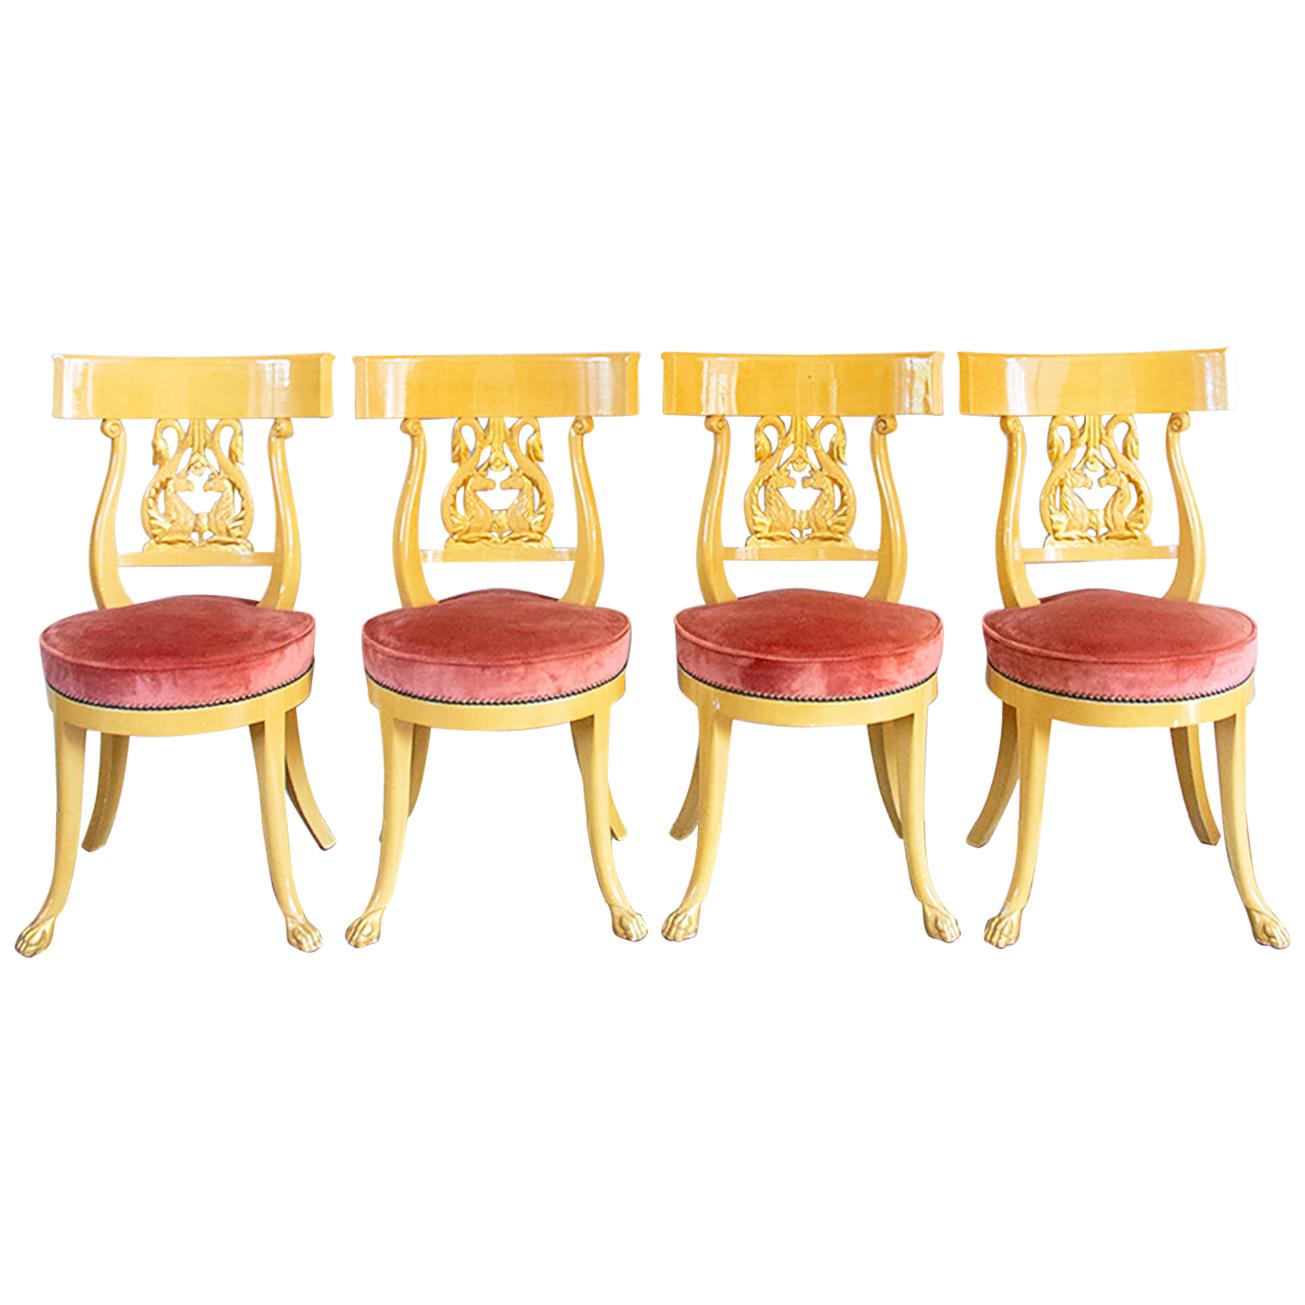 Superb Set of Italian Chairs in Yellow Gold Lacquered Wood, circa 1950 For Sale